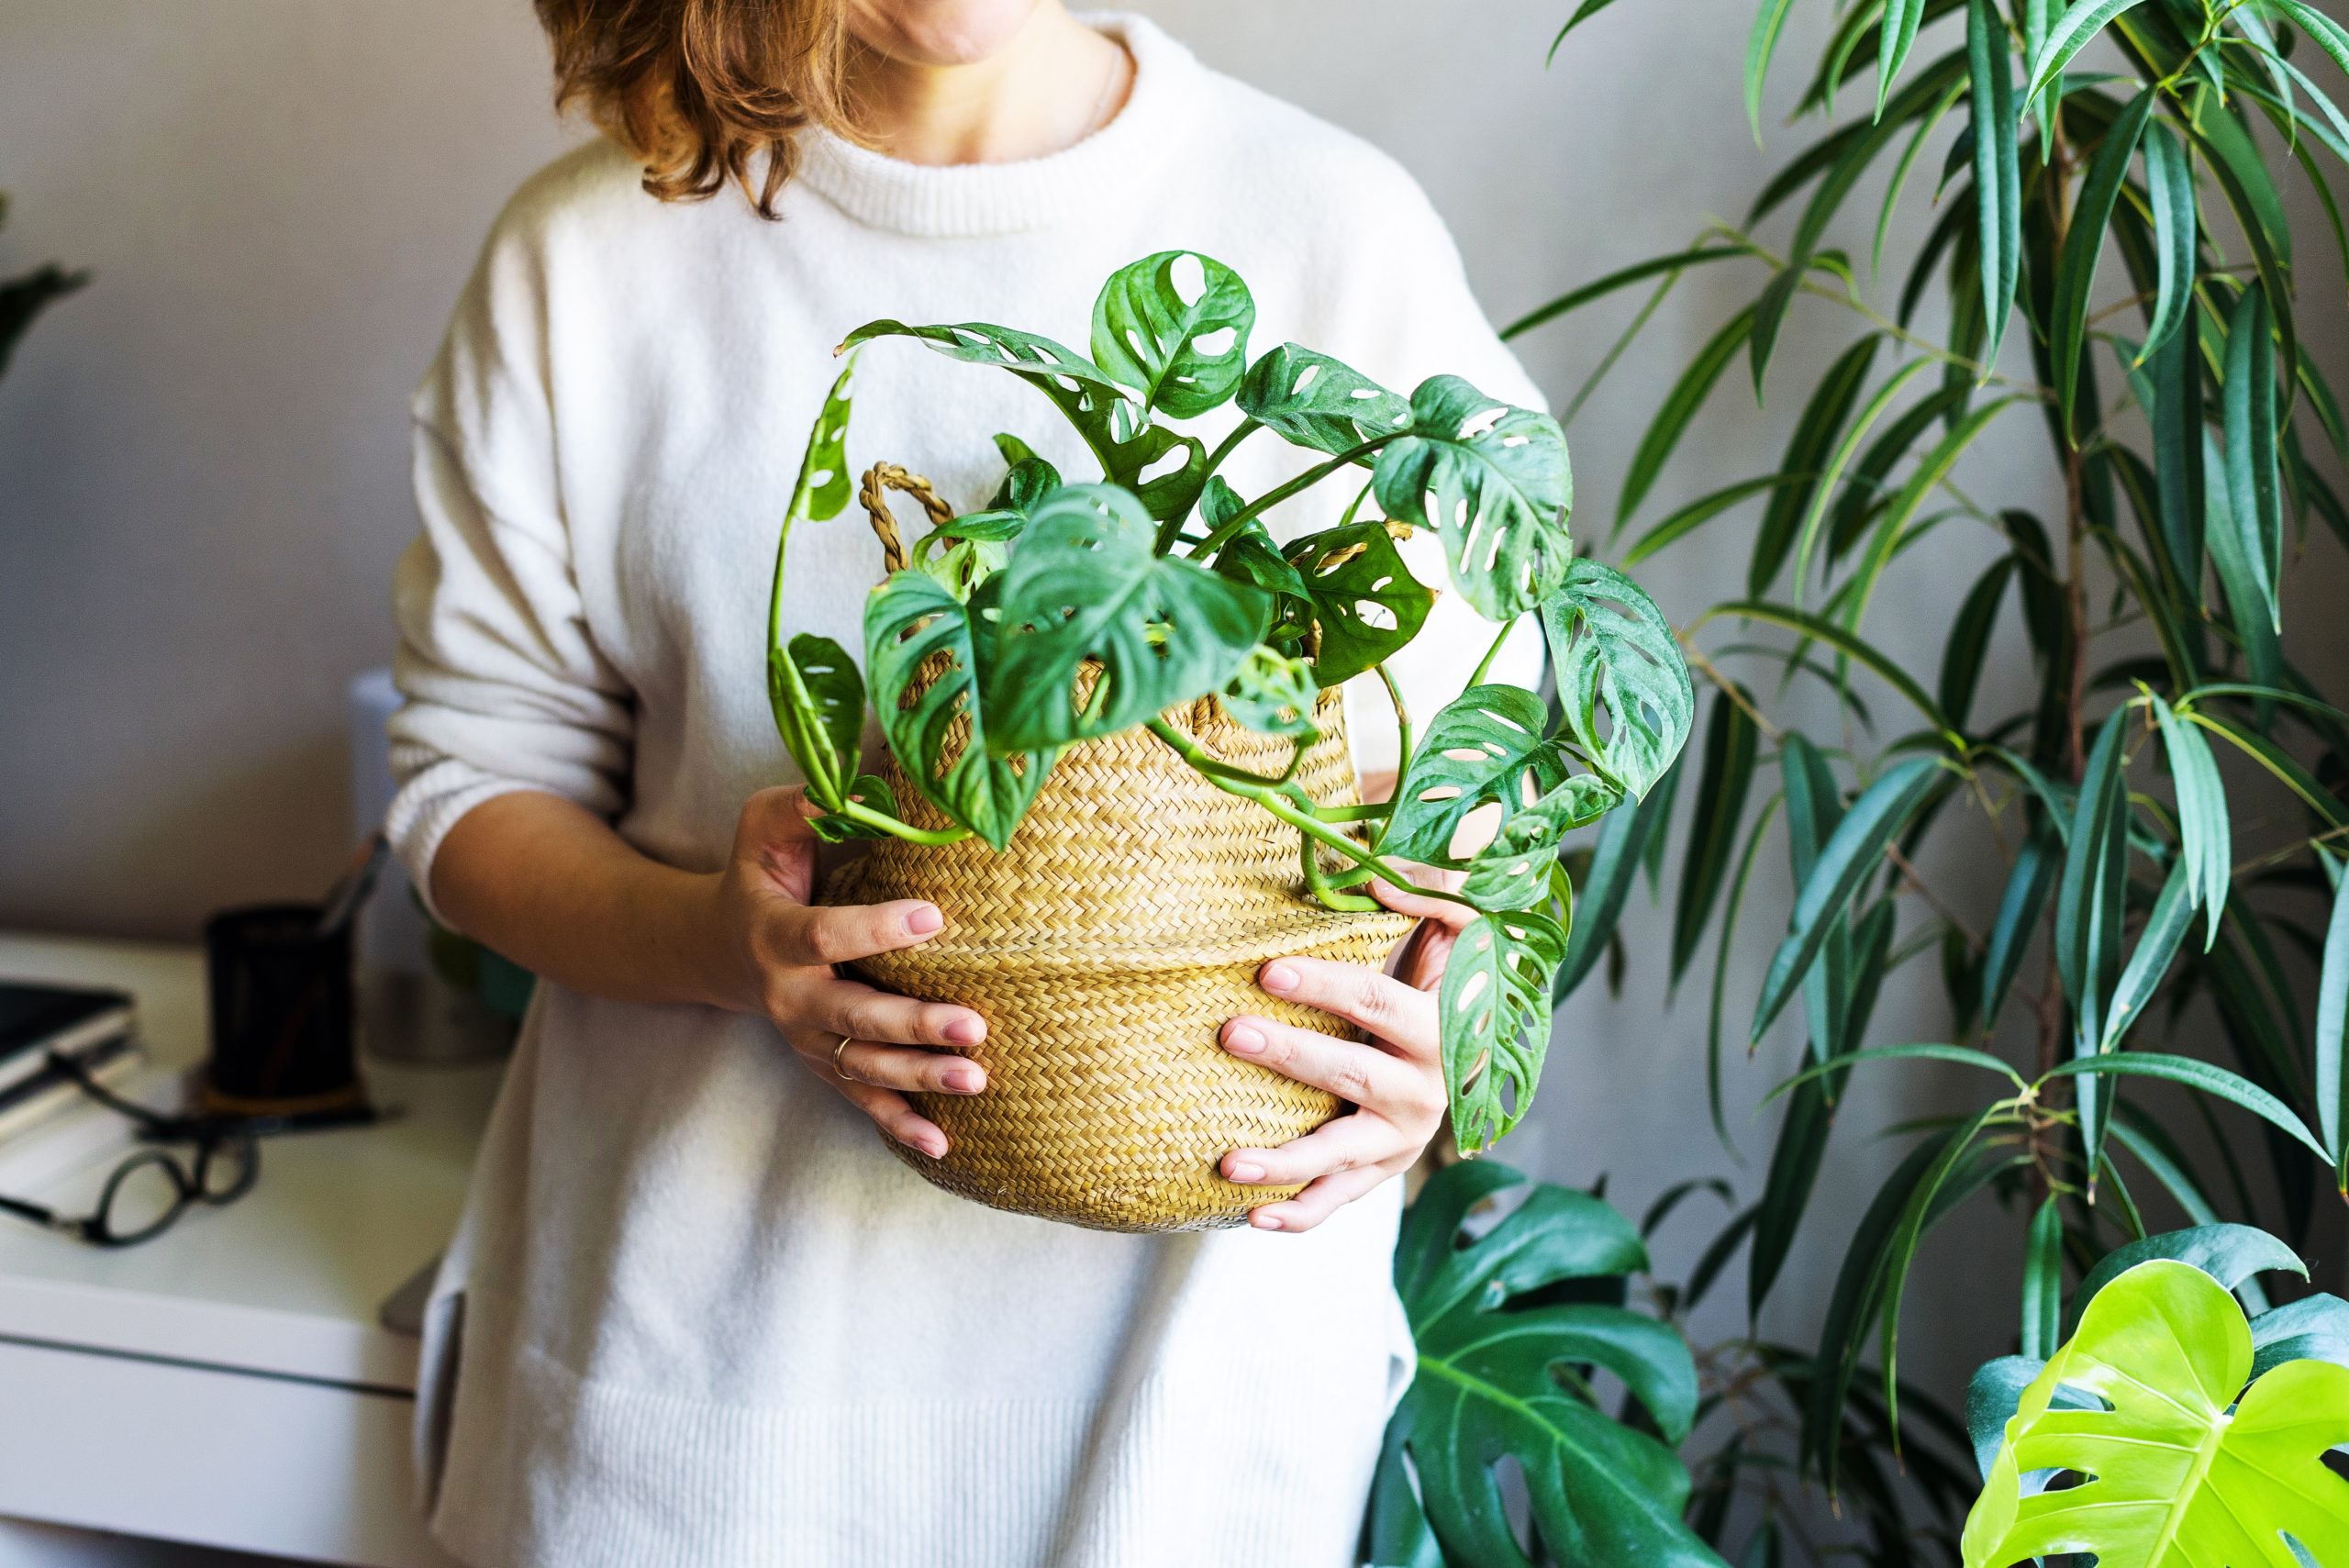 Blond woman holds a basket with a house plant in it. Other plants and a desk workspace appear in the background.